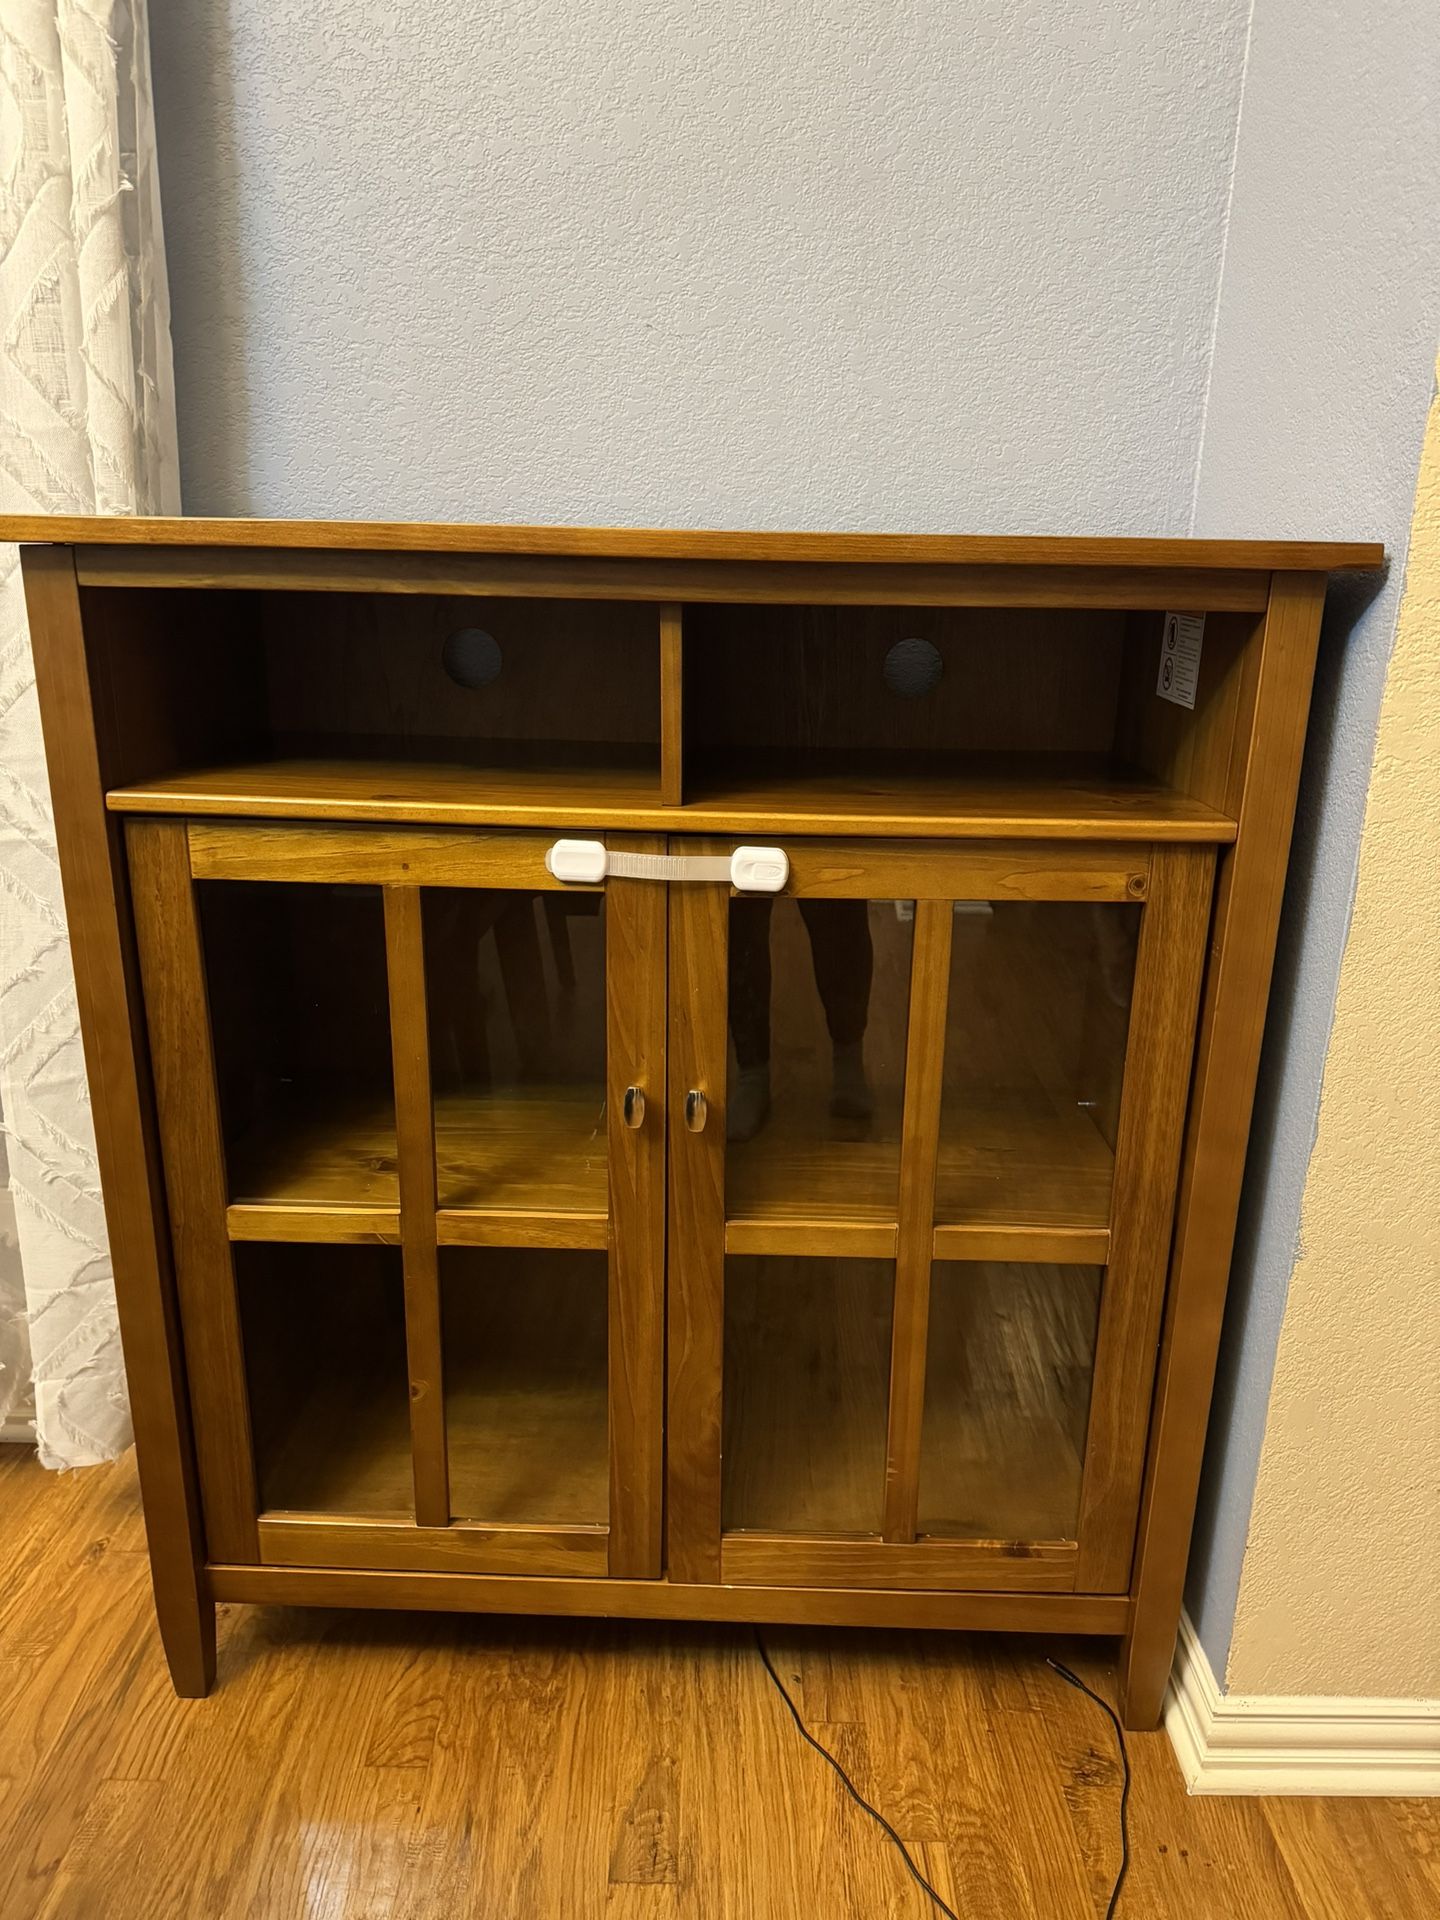 Wood Storage Media Cabinet With Glass Doors